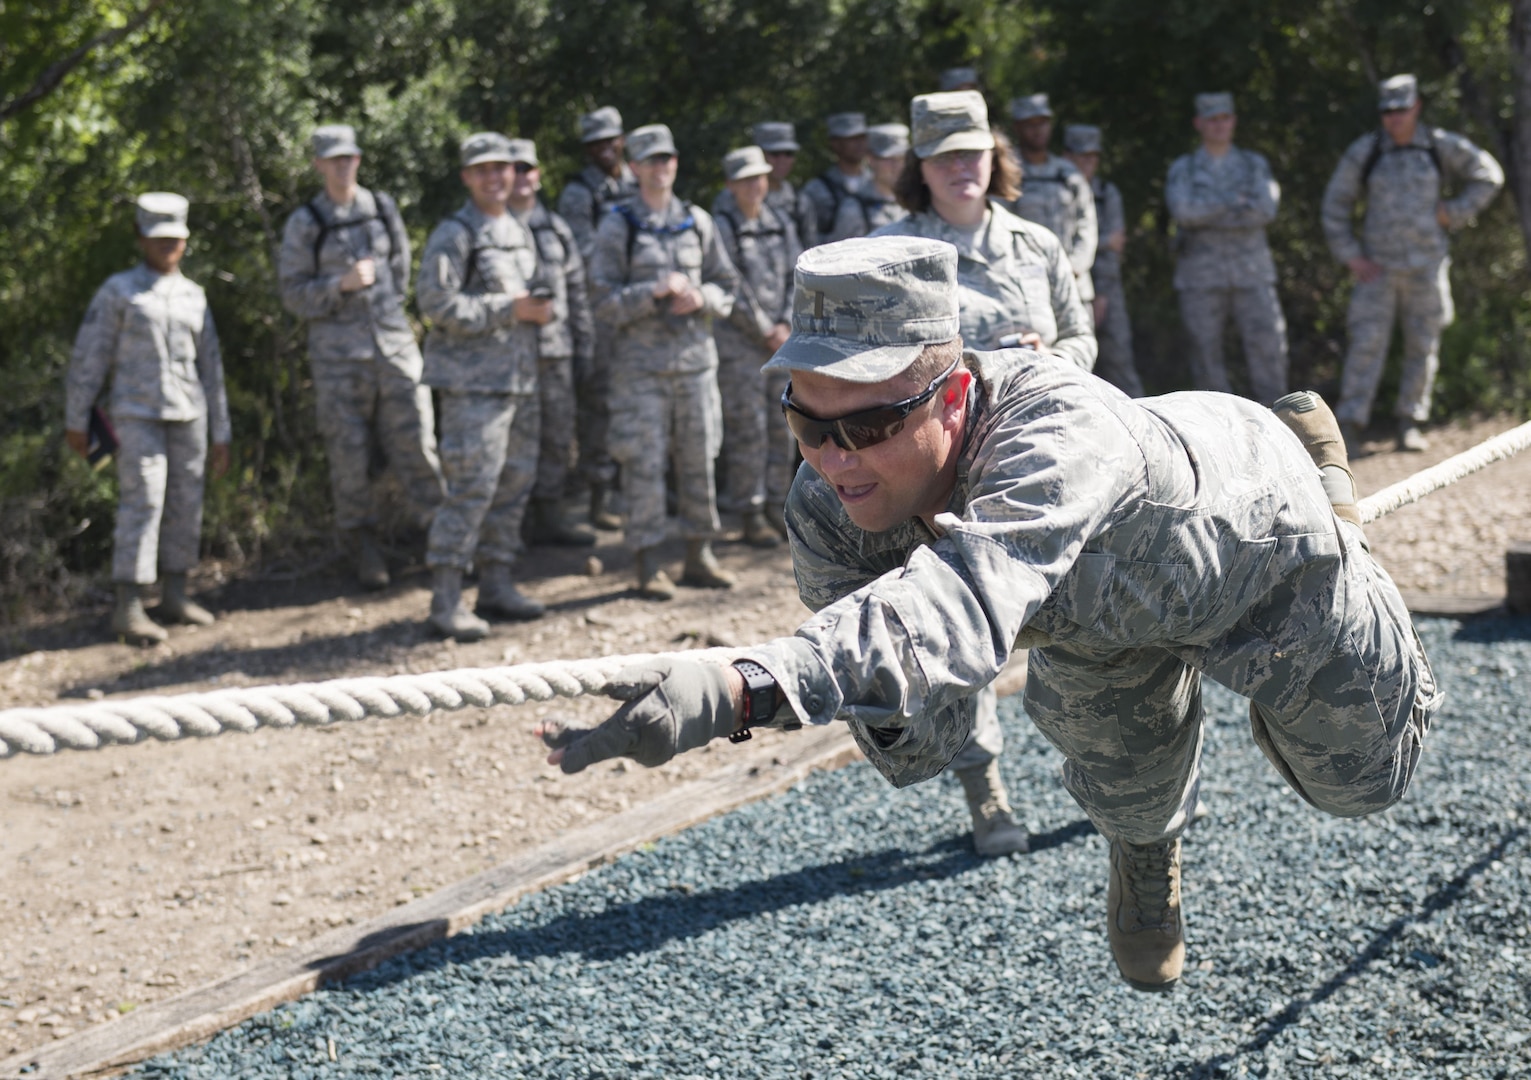 A chaplain candidate attempts to complete one of the  Creating Leader Airmen Warriors, or CLAW, course's obstacles during a tour of the Basic Expeditionary Airmen Skills Training at Joint Base San Antonio-Lackland, Texas, July 5, 2017. The tour was part of the Chaplain Candidate Intensive Internship. (U.S. Air Force photo by Senior Airman Krystal Wright)